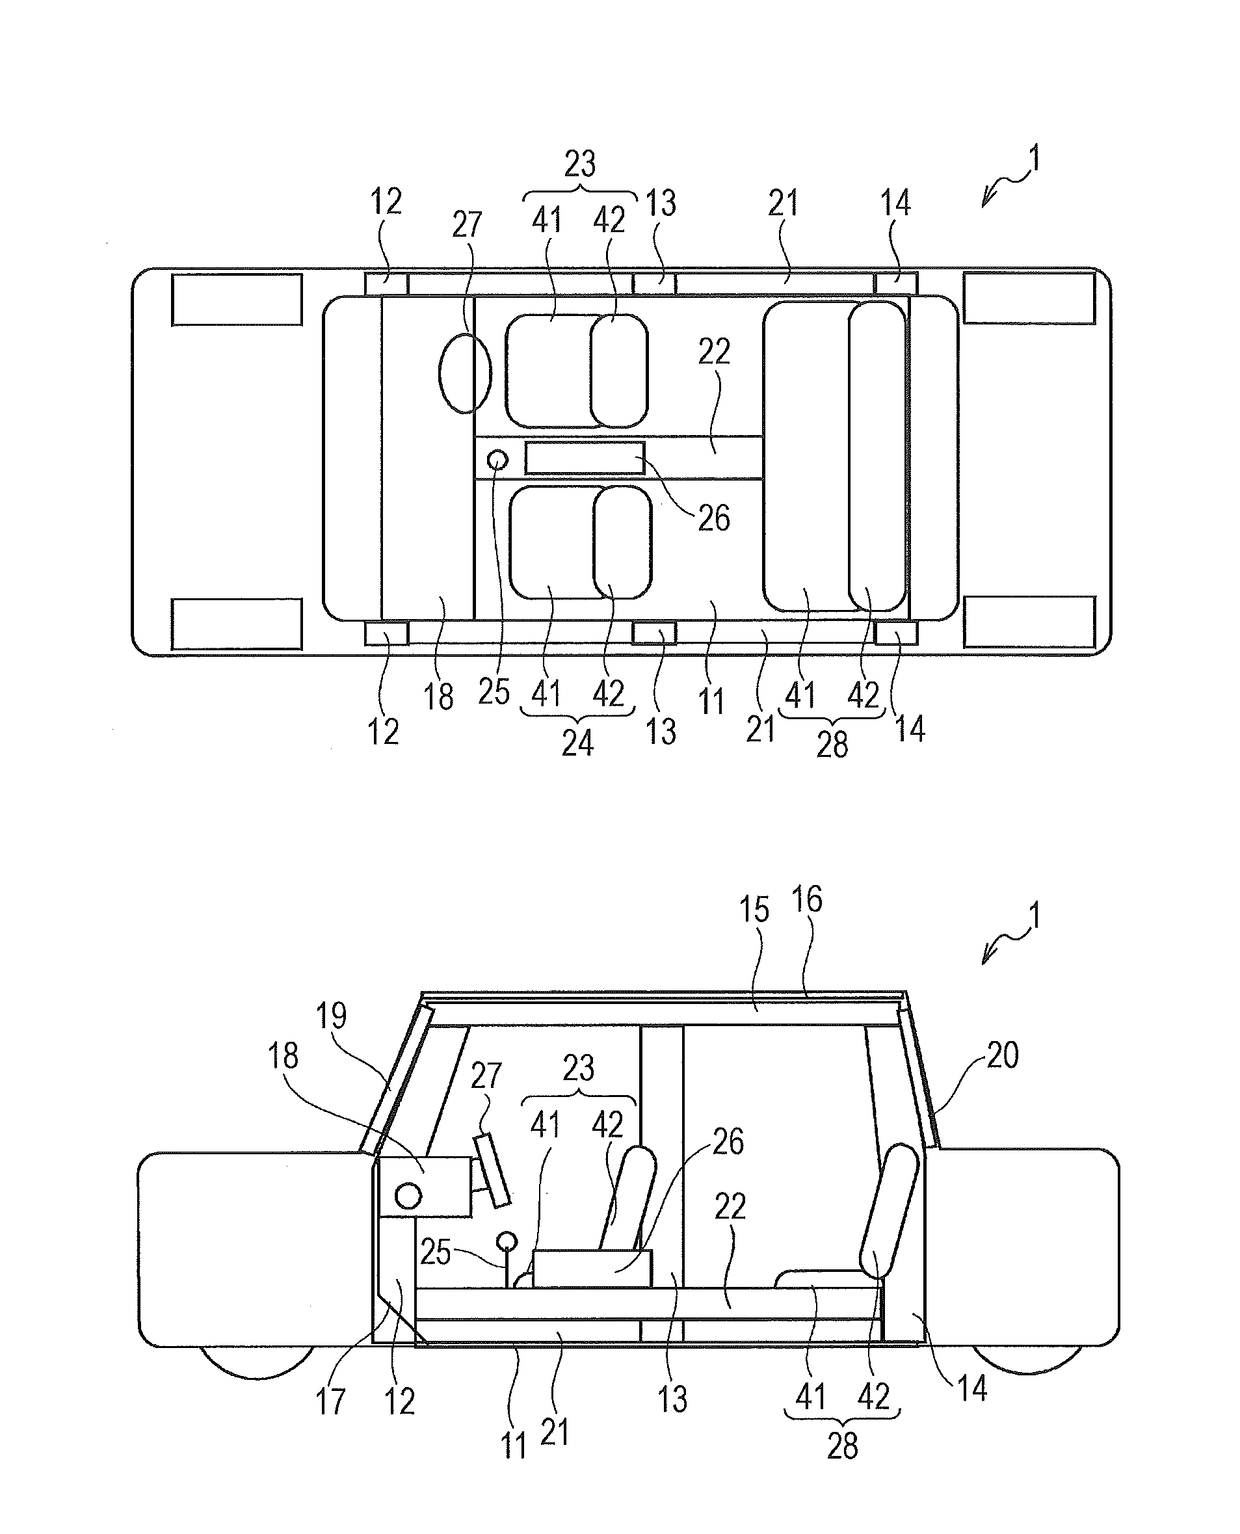 Vehicle occupant protection device